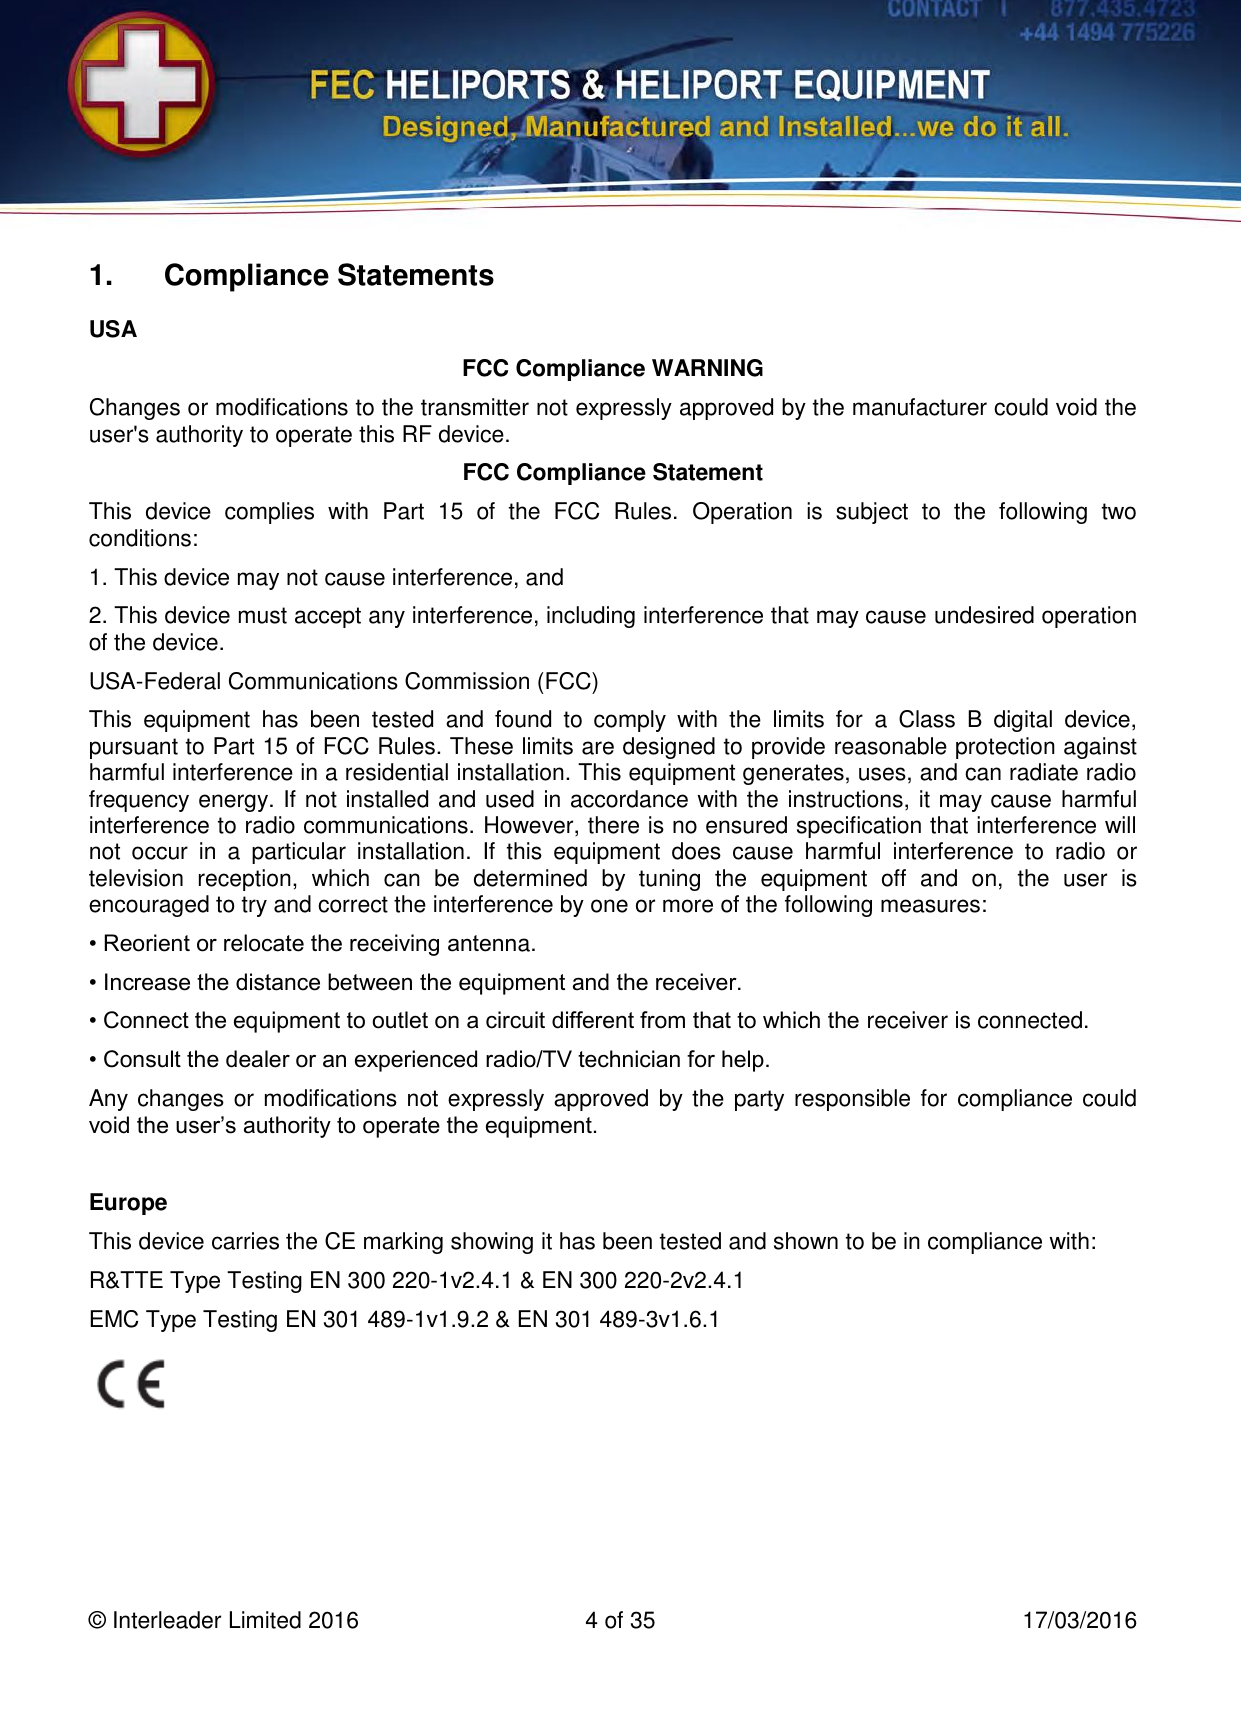   © Interleader Limited 2016  4 of 35  17/03/2016 1.  Compliance Statements USA FCC Compliance WARNING Changes or modifications to the transmitter not expressly approved by the manufacturer could void the user&apos;s authority to operate this RF device. FCC Compliance Statement This  device  complies  with  Part  15  of  the  FCC  Rules.  Operation  is  subject  to  the  following  two conditions: 1. This device may not cause interference, and 2. This device must accept any interference, including interference that may cause undesired operation of the device. USA-Federal Communications Commission (FCC) This  equipment  has  been  tested  and  found  to  comply  with  the  limits  for  a  Class  B  digital  device, pursuant to Part 15 of FCC Rules. These limits are designed to provide reasonable protection against harmful interference in a residential installation. This equipment generates, uses, and can radiate radio frequency energy. If not installed and used in accordance with the instructions, it may cause harmful interference to radio communications. However, there is no ensured specification that interference will not  occur  in  a  particular  installation.  If  this  equipment  does  cause  harmful  interference  to  radio  or television  reception,  which  can  be  determined  by  tuning  the  equipment  off  and  on,  the  user  is encouraged to try and correct the interference by one or more of the following measures: • Reorient or relocate the receiving antenna. • Increase the distance between the equipment and the receiver. • Connect the equipment to outlet on a circuit different from that to which the receiver is connected. • Consult the dealer or an experienced radio/TV technician for help. Any changes or modifications not expressly approved by the party responsible for compliance could void the user’s authority to operate the equipment.  Europe This device carries the CE marking showing it has been tested and shown to be in compliance with: R&amp;TTE Type Testing EN 300 220-1v2.4.1 &amp; EN 300 220-2v2.4.1 EMC Type Testing EN 301 489-1v1.9.2 &amp; EN 301 489-3v1.6.1    